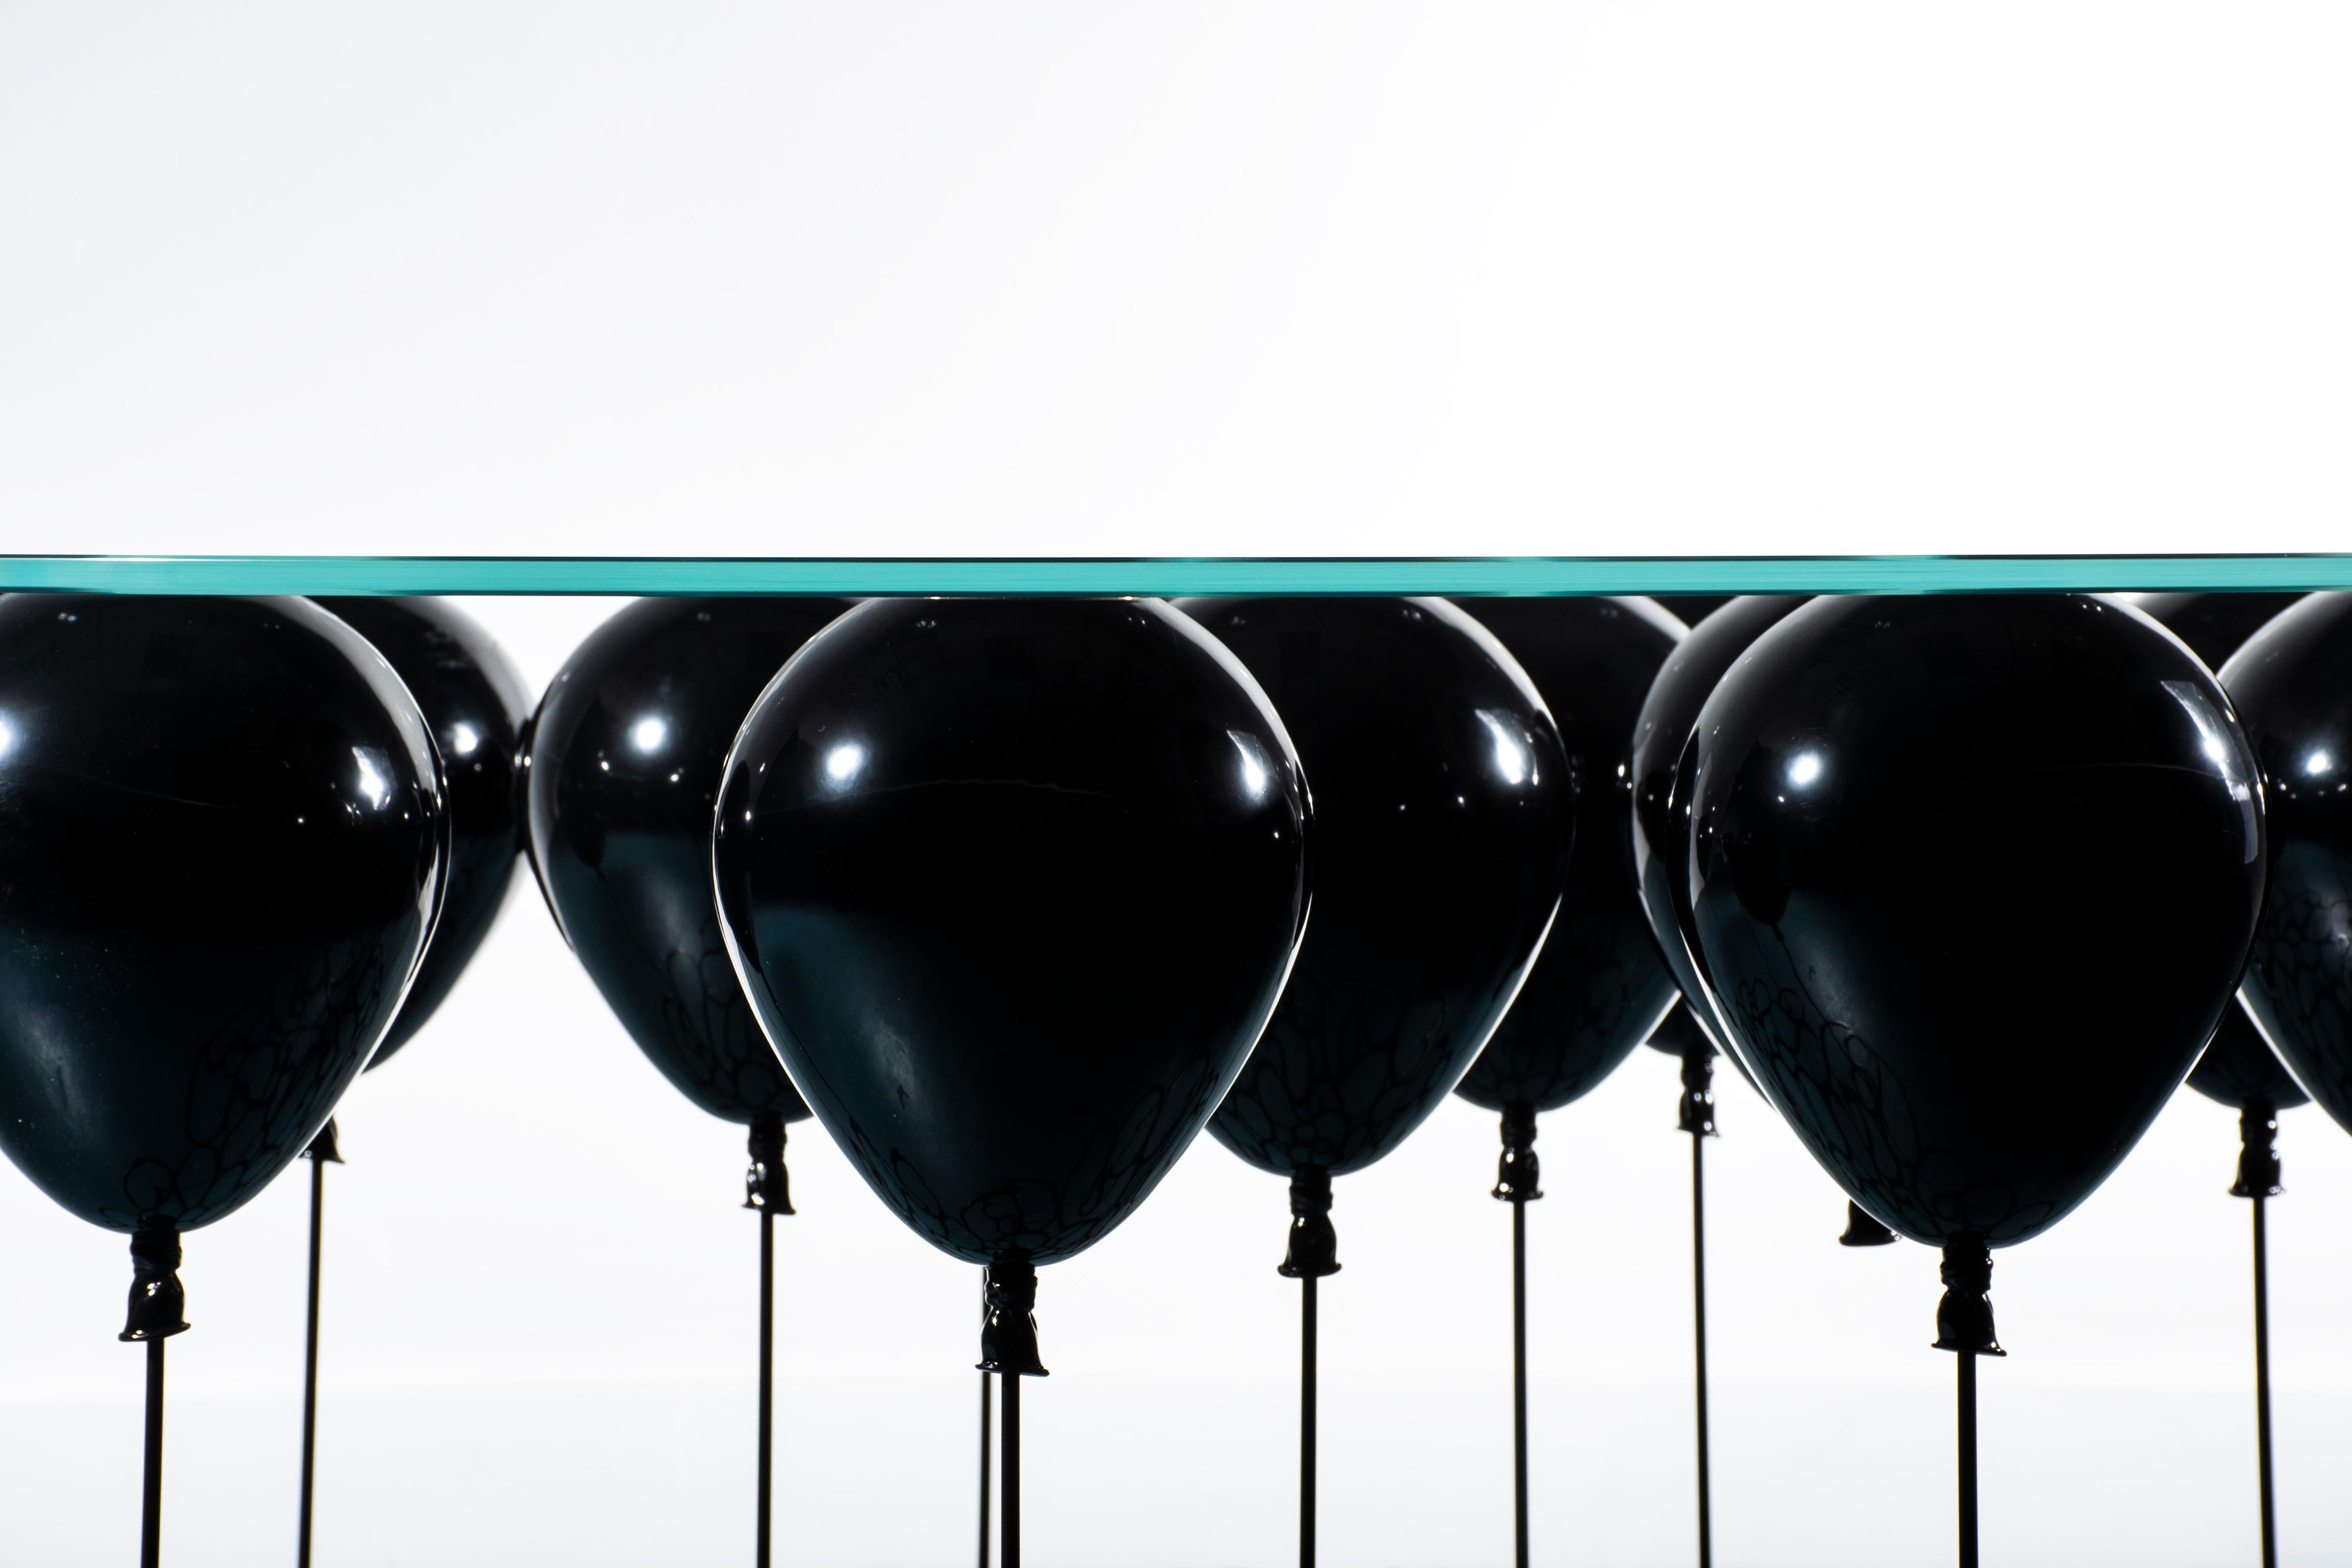 For those who prefer their fun a little darker, The Up! Balloon Coffee Table from acclaimed British designer Christopher Duffy has gone macabre with a glossy black finish, available on both the balloons and the legs.

Adapted from the original UP